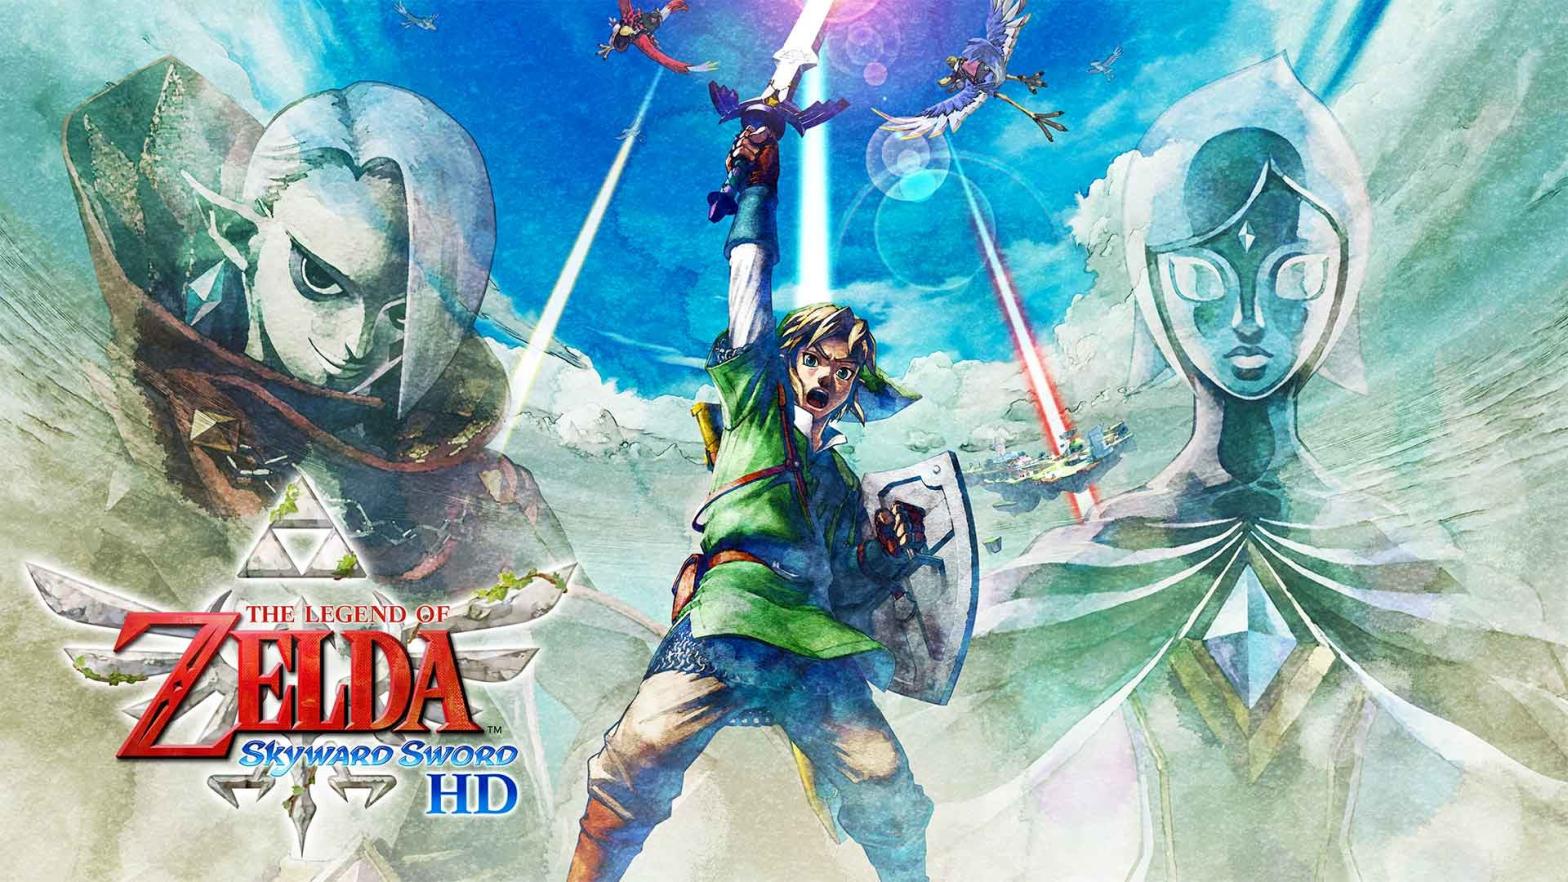 Skyward Sword HD comes to the Nintendo Switch July 16. (Image: Nintendo)